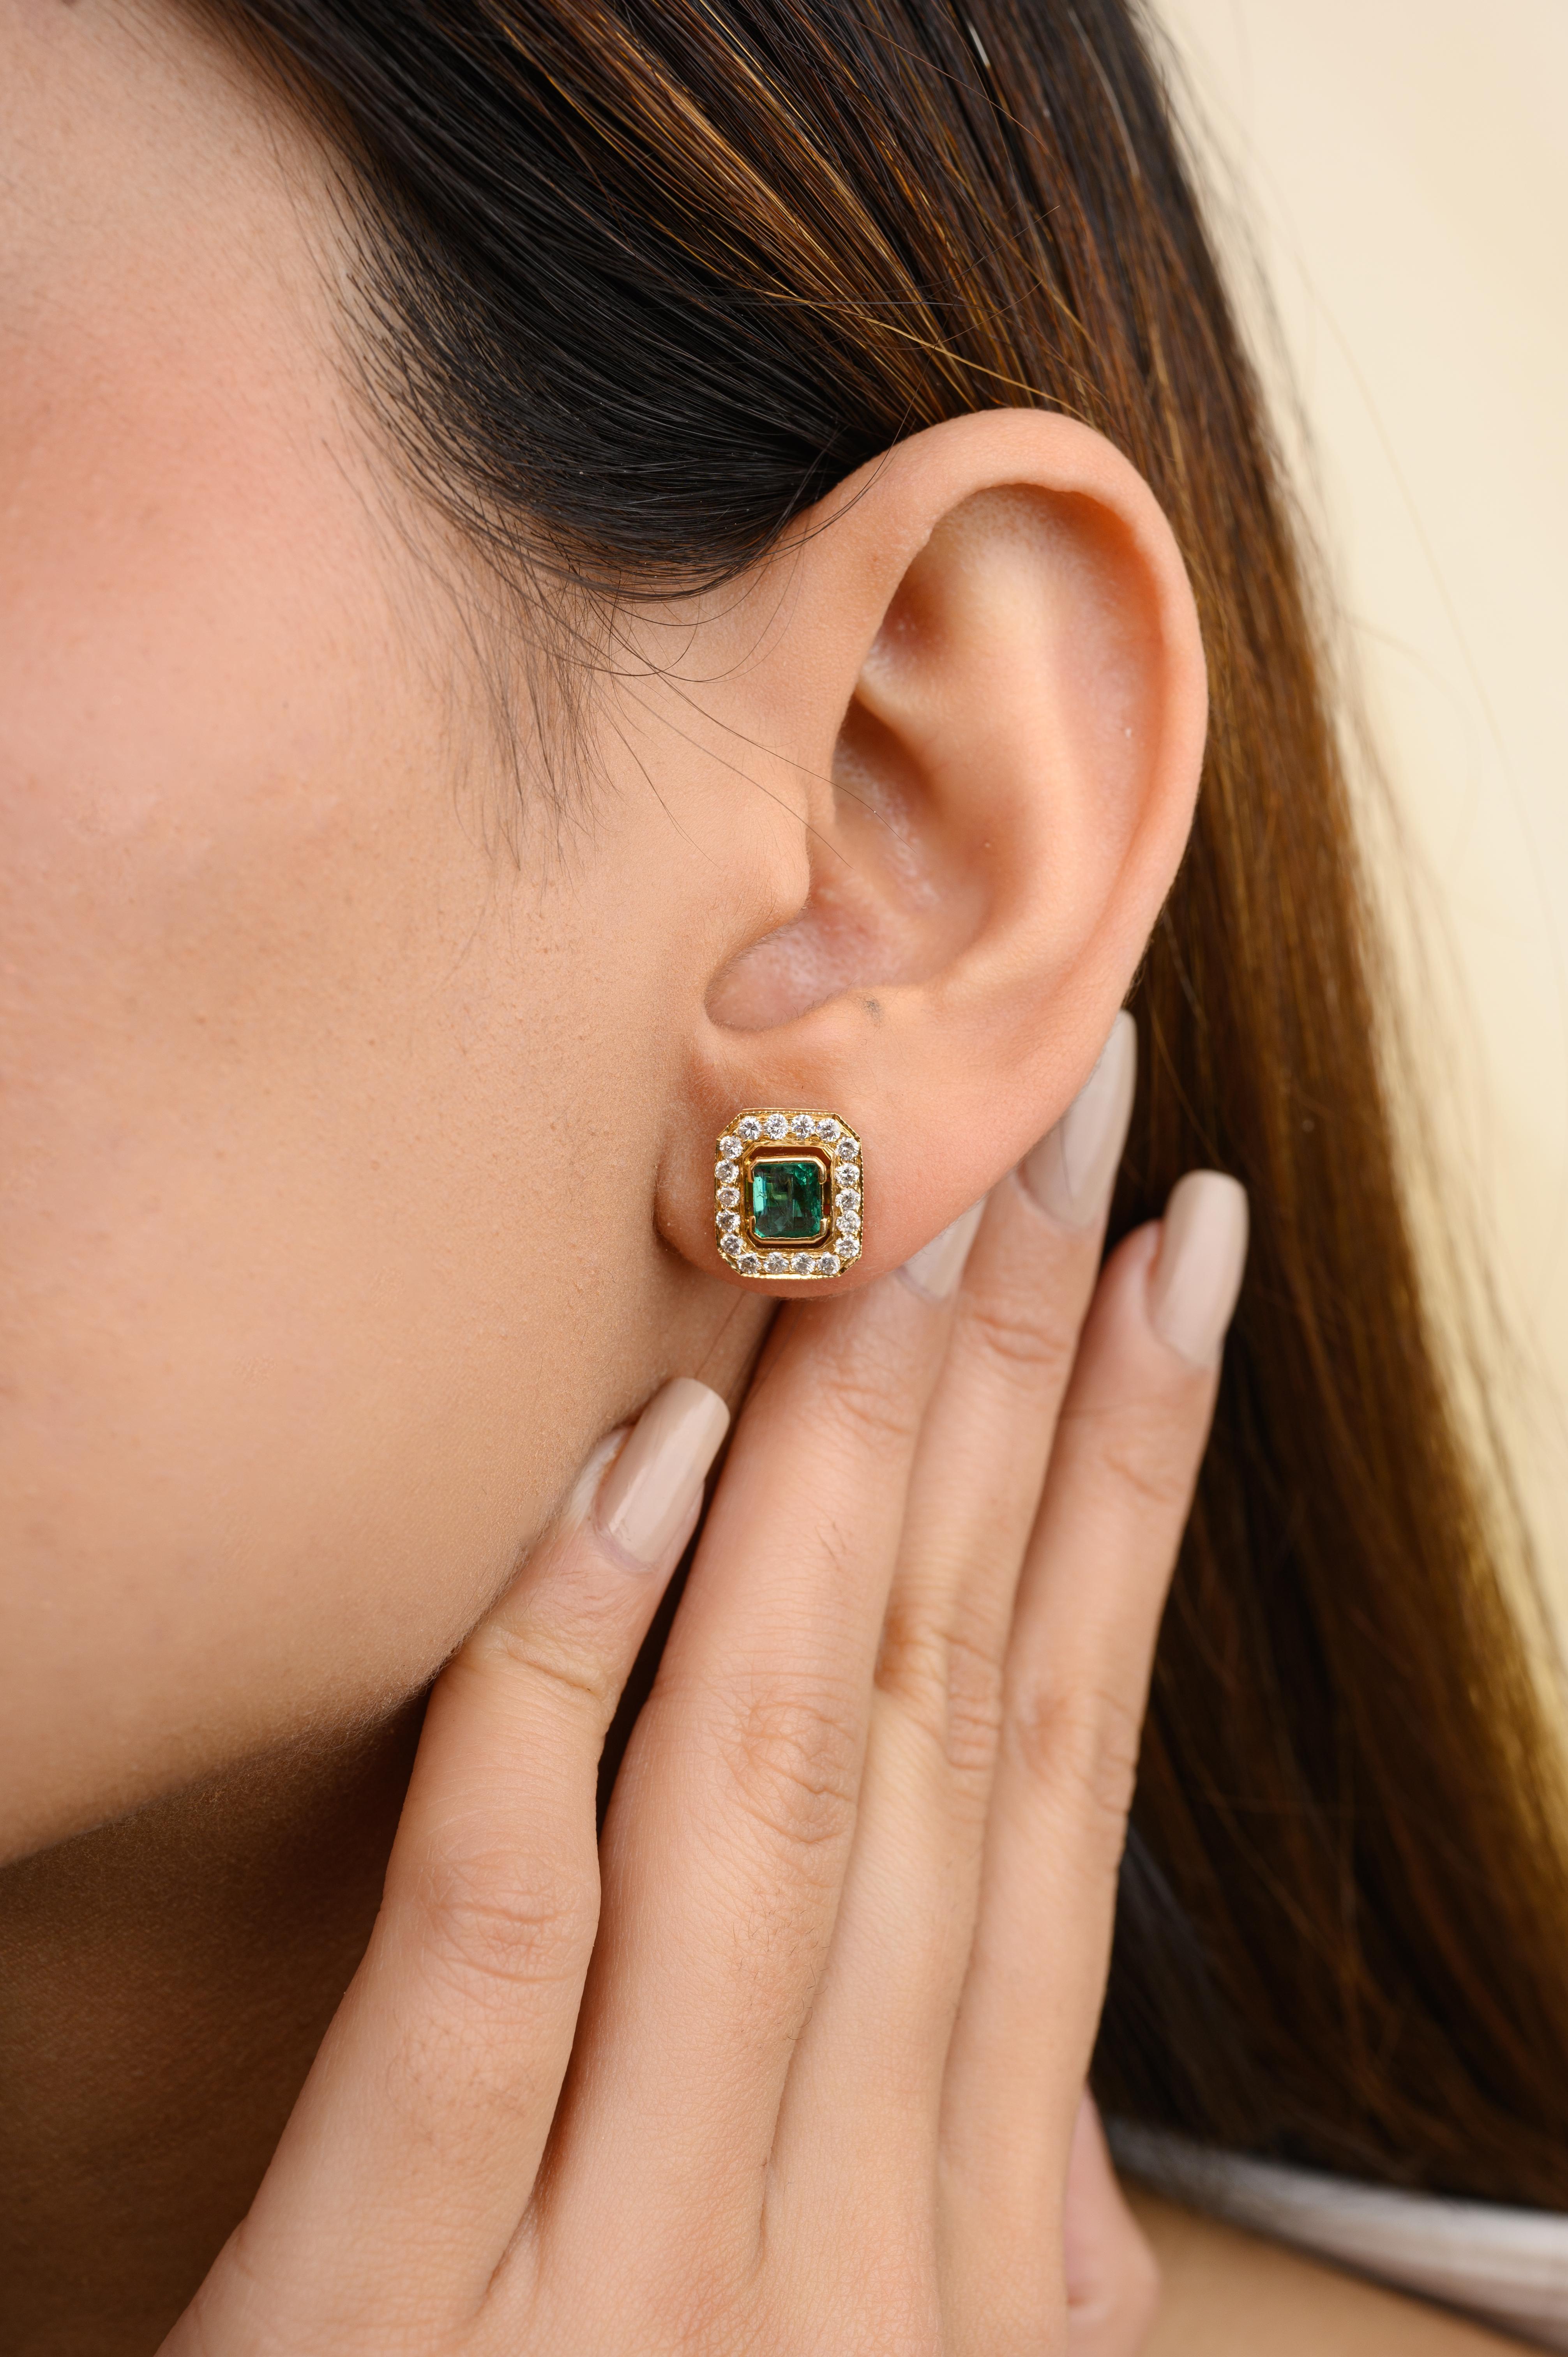 Octagon Cut Emerald and Diamond Big Stud Earrings in 18K Gold to make a statement with your look. You shall need stud earrings to make a statement with your look. These earrings create a sparkling, luxurious look featuring octagon cut